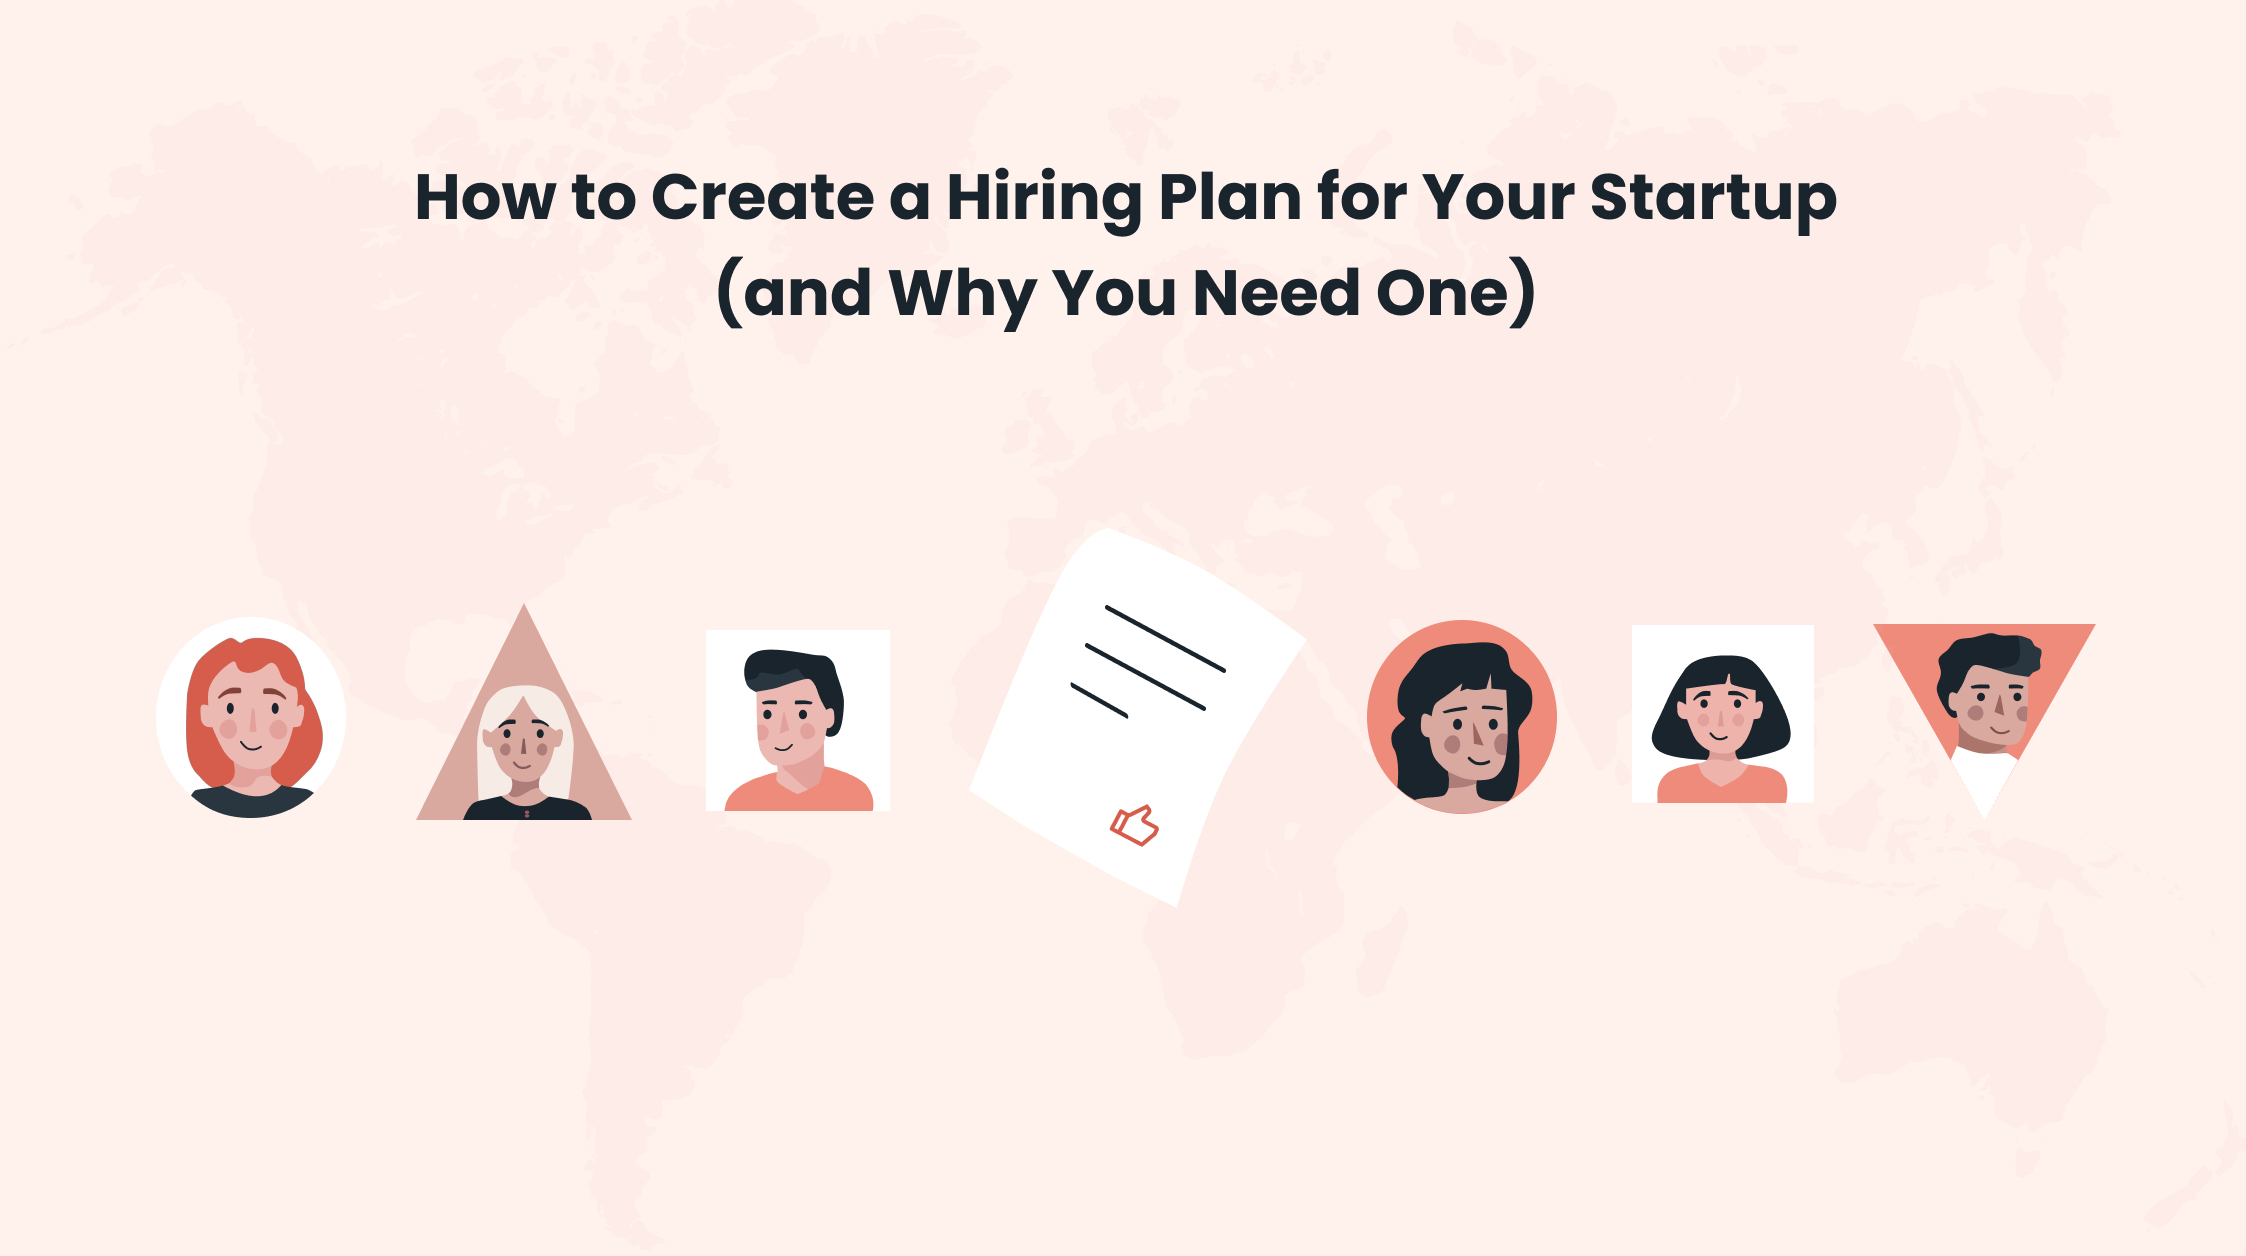 How to Create a Hiring Plan for Your Startup (and Why You Need One)